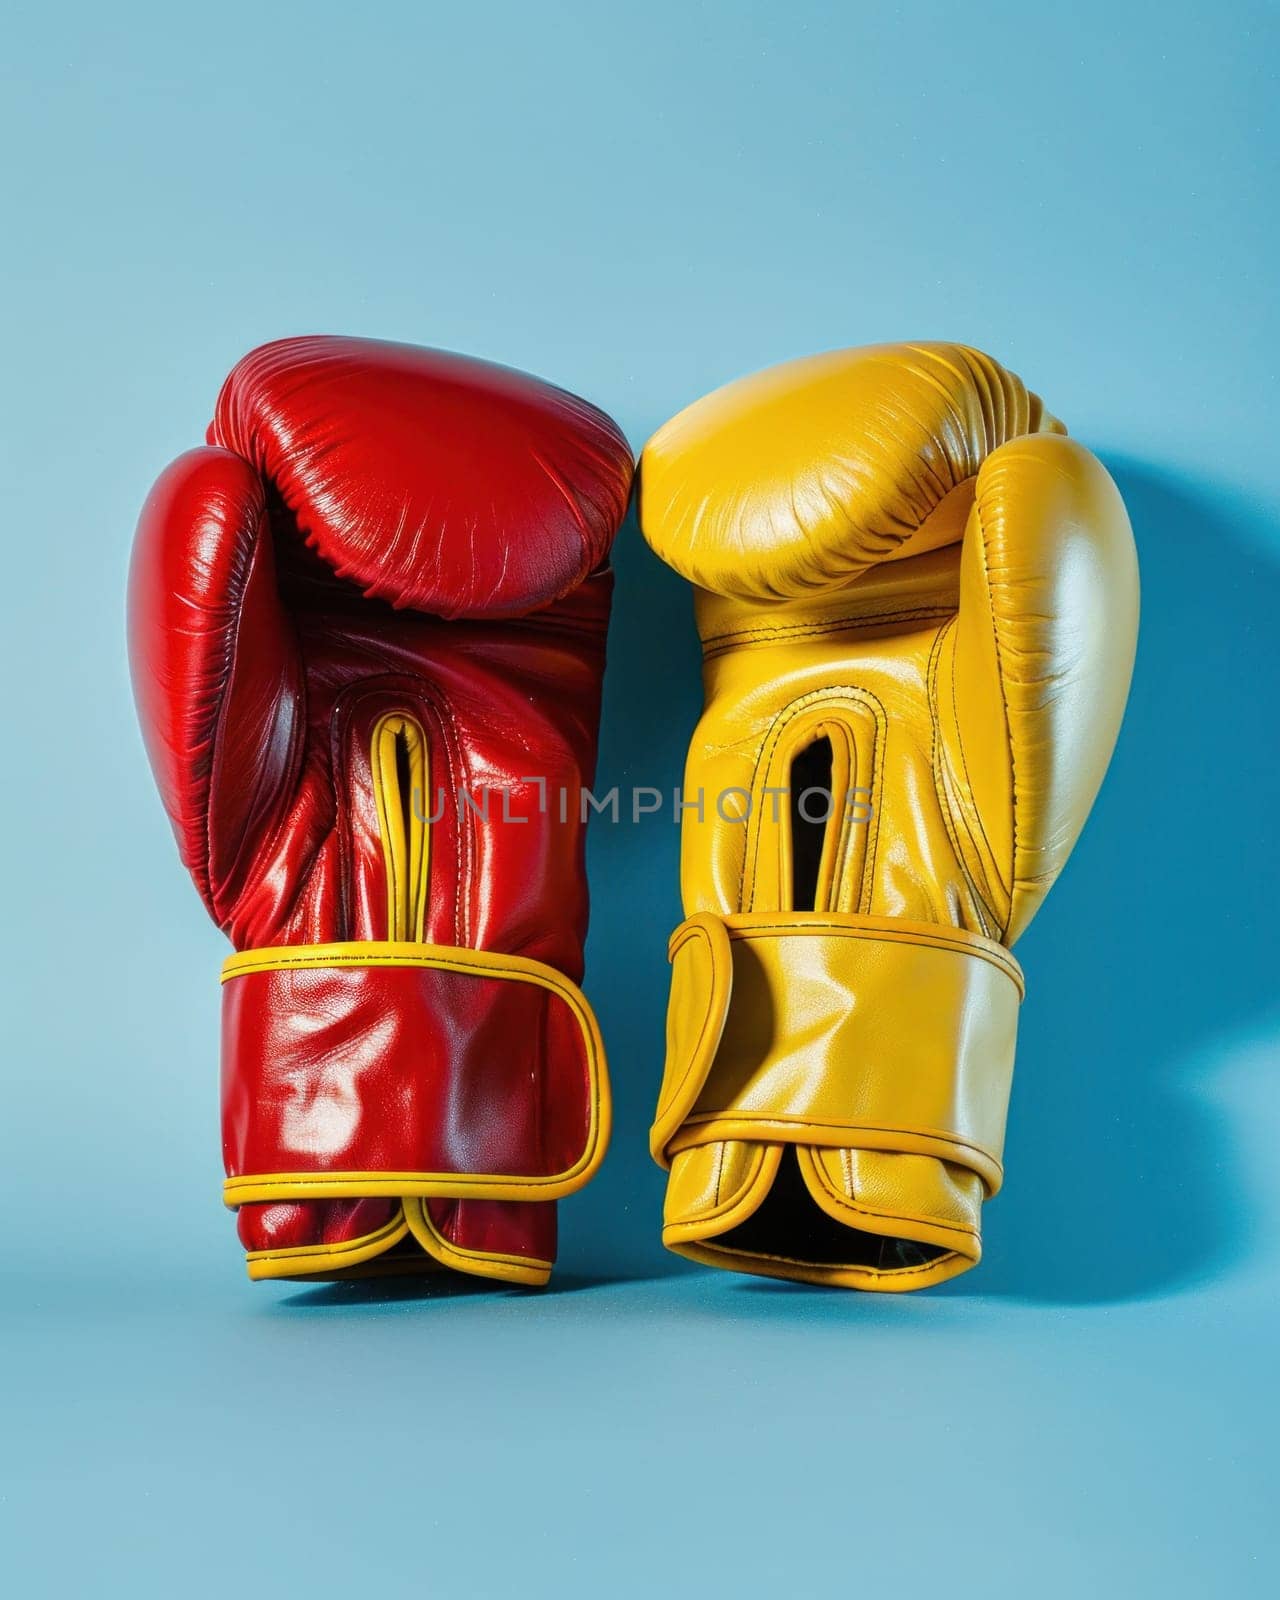 Pair of red boxing gloves on blue background for sports and fitness concept with copy space by Vichizh